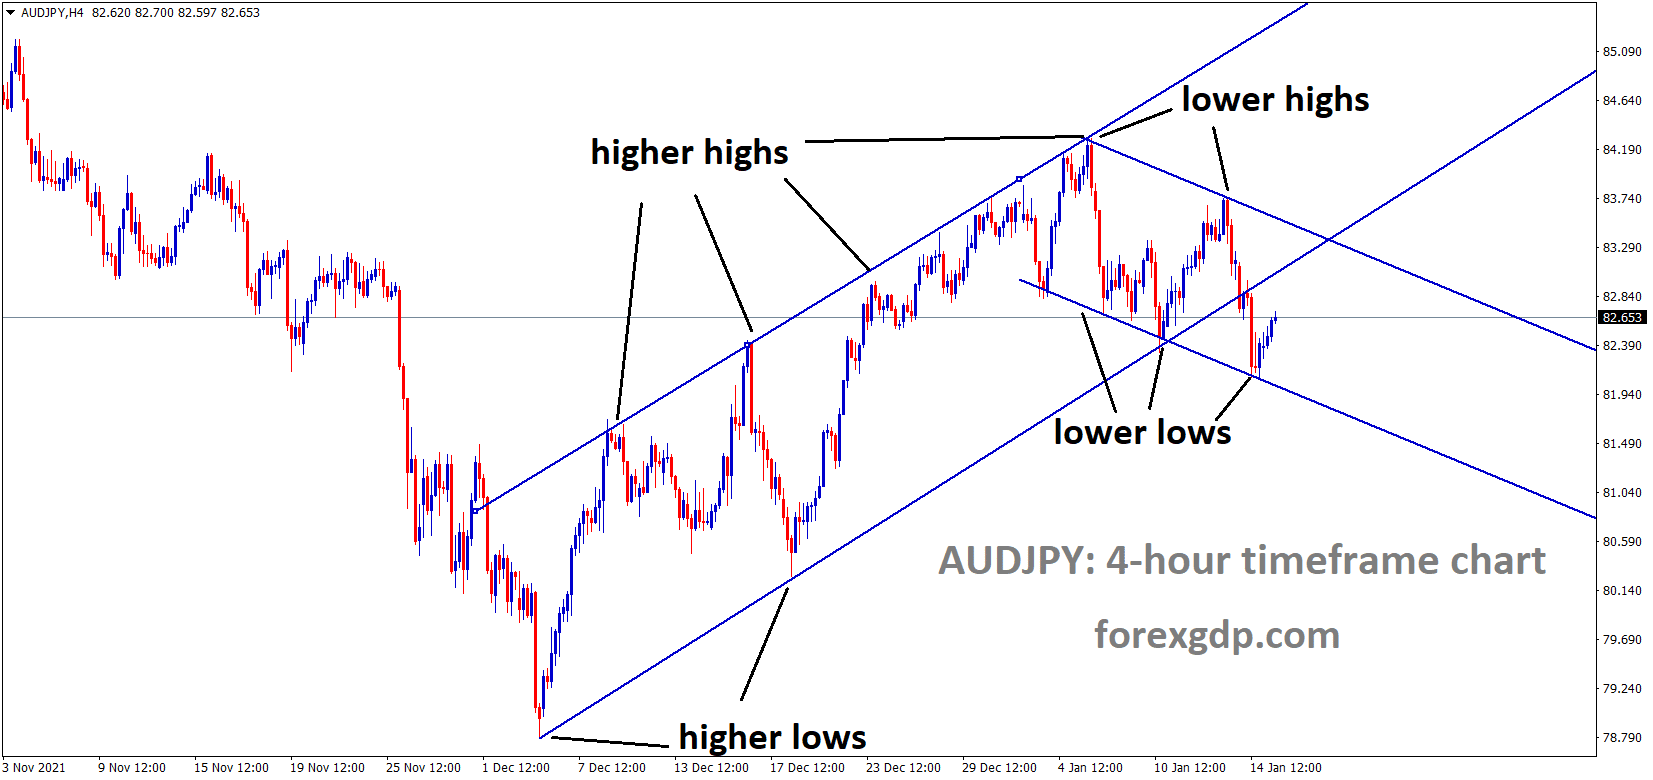 AUDJPY is moving in the Descending channel and the market has rebounded from the lower low area of the channel